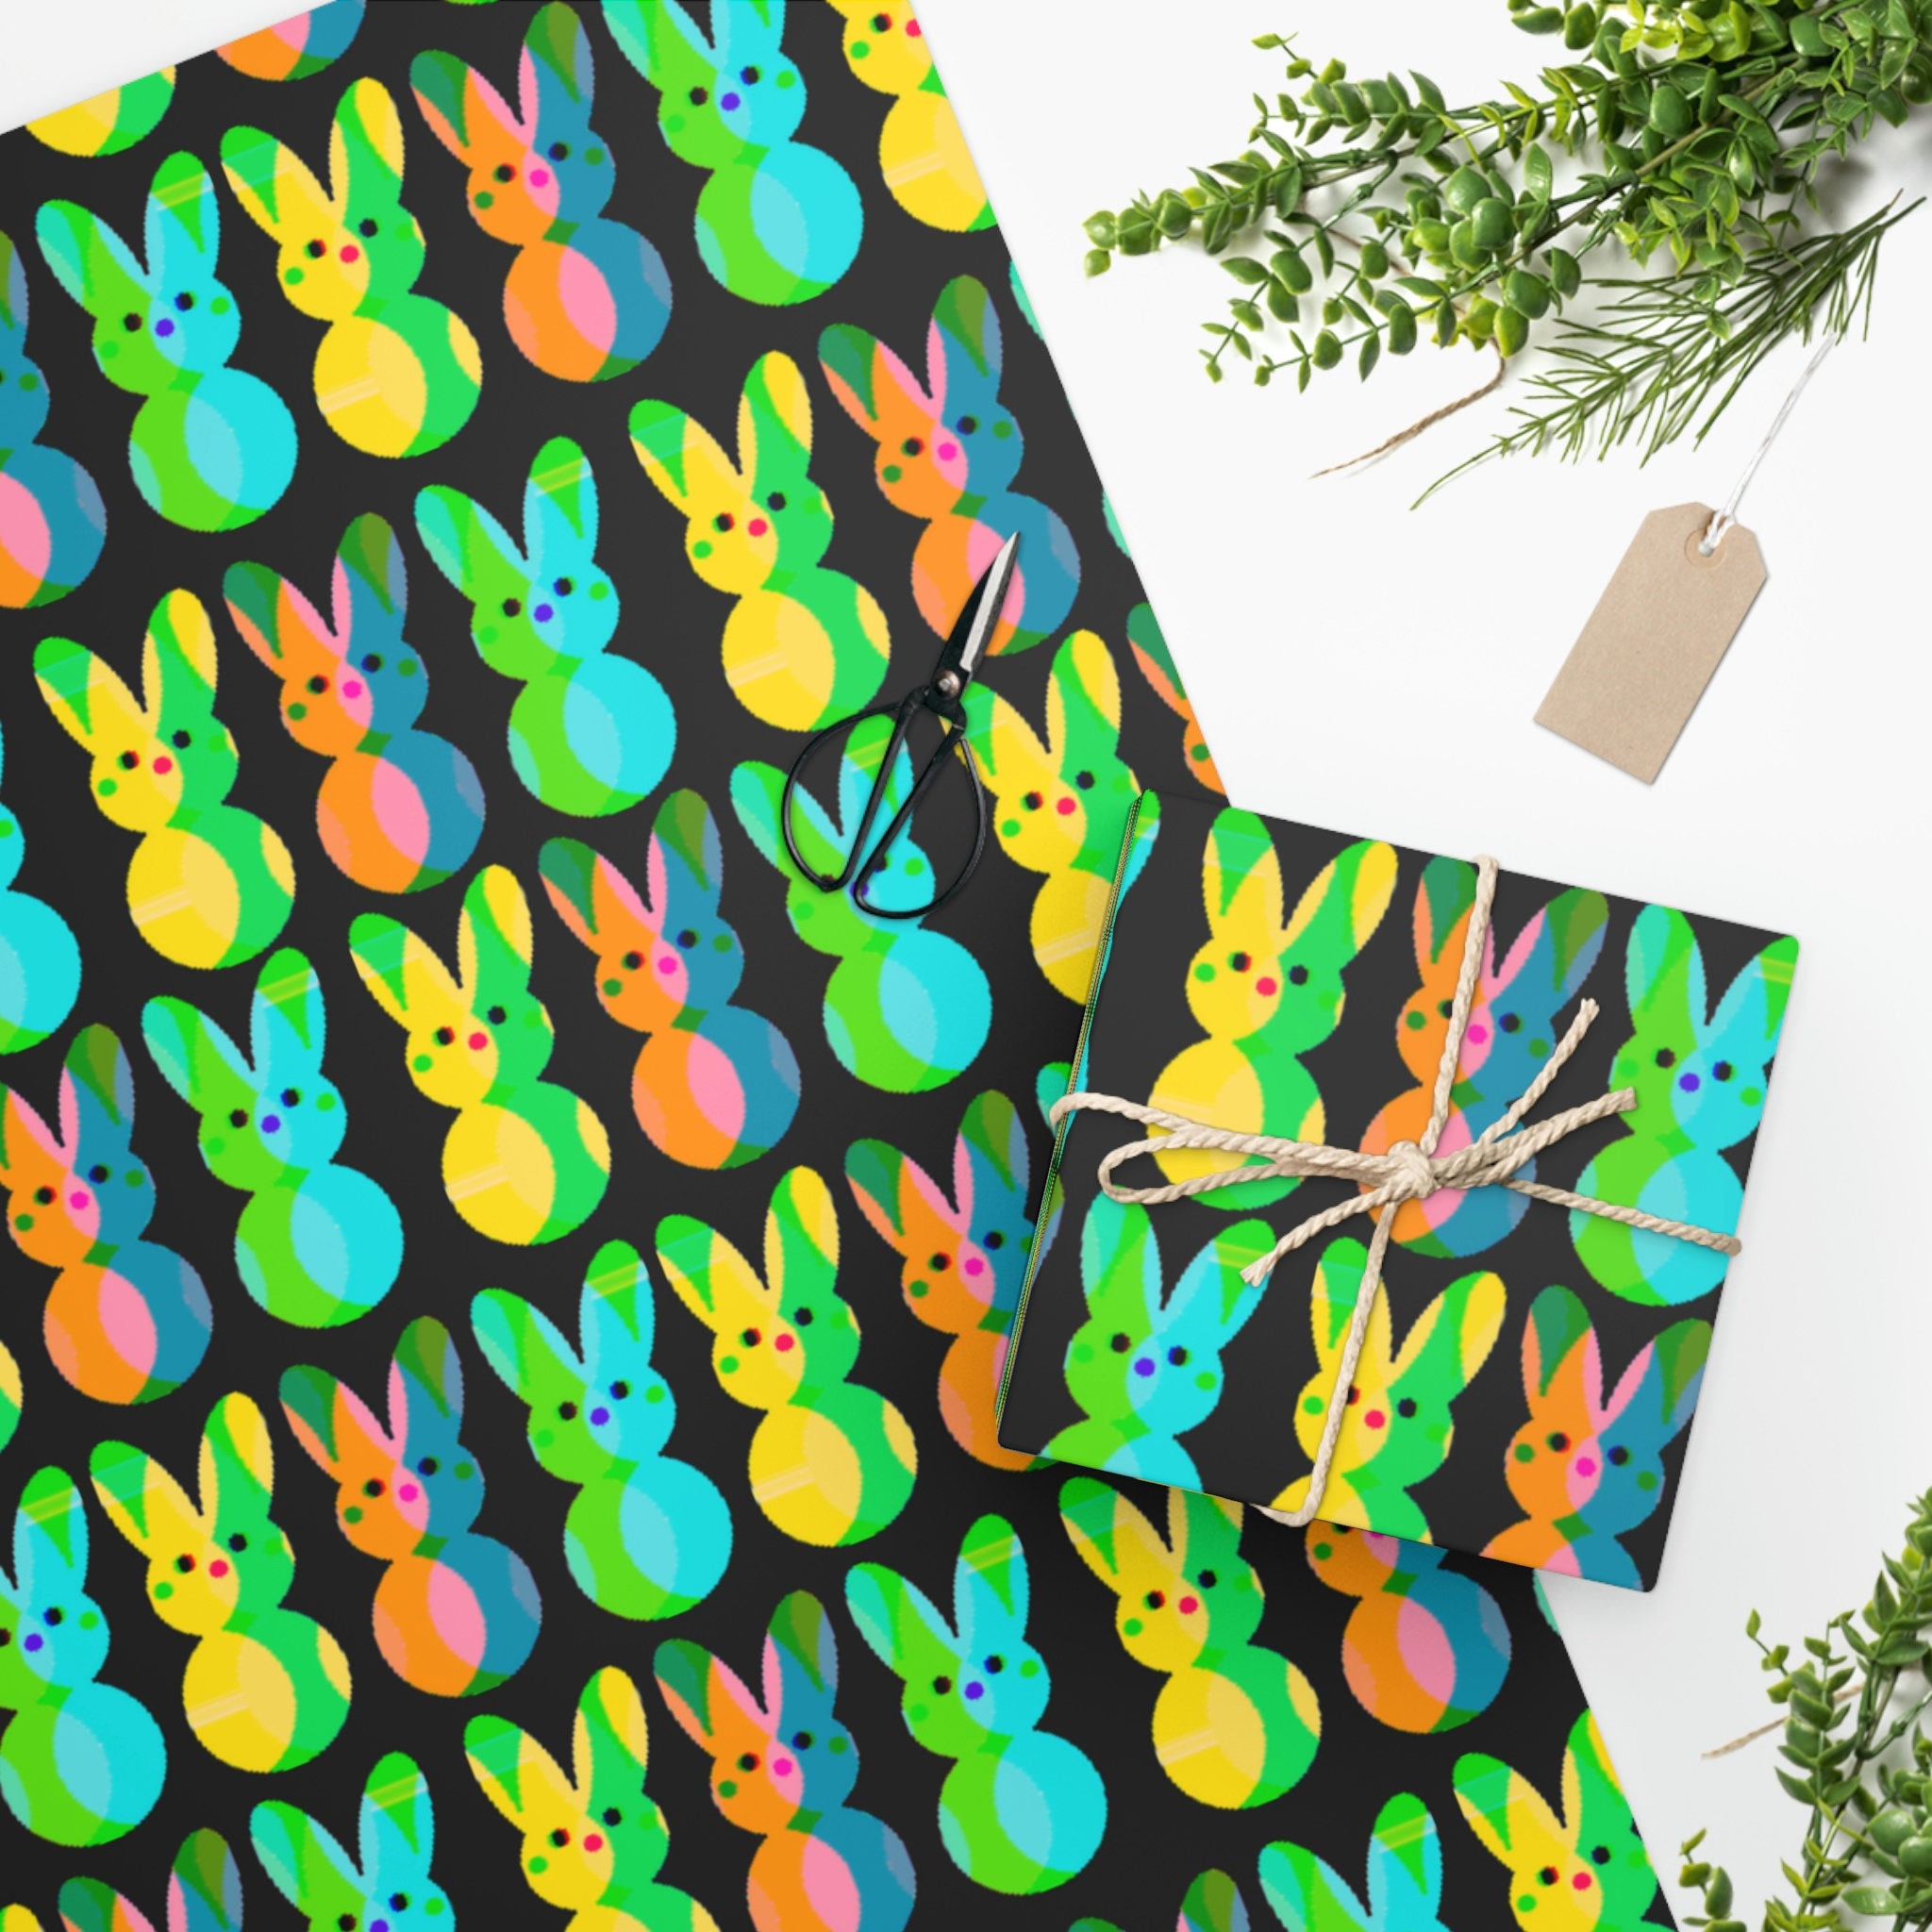 Easter Gift Wrap, Easter Wrapping Paper, Easter Bunny Gift Wrap, Happy  Easter Gift Wrap, Cute Easter Bunny Gift Wrap 